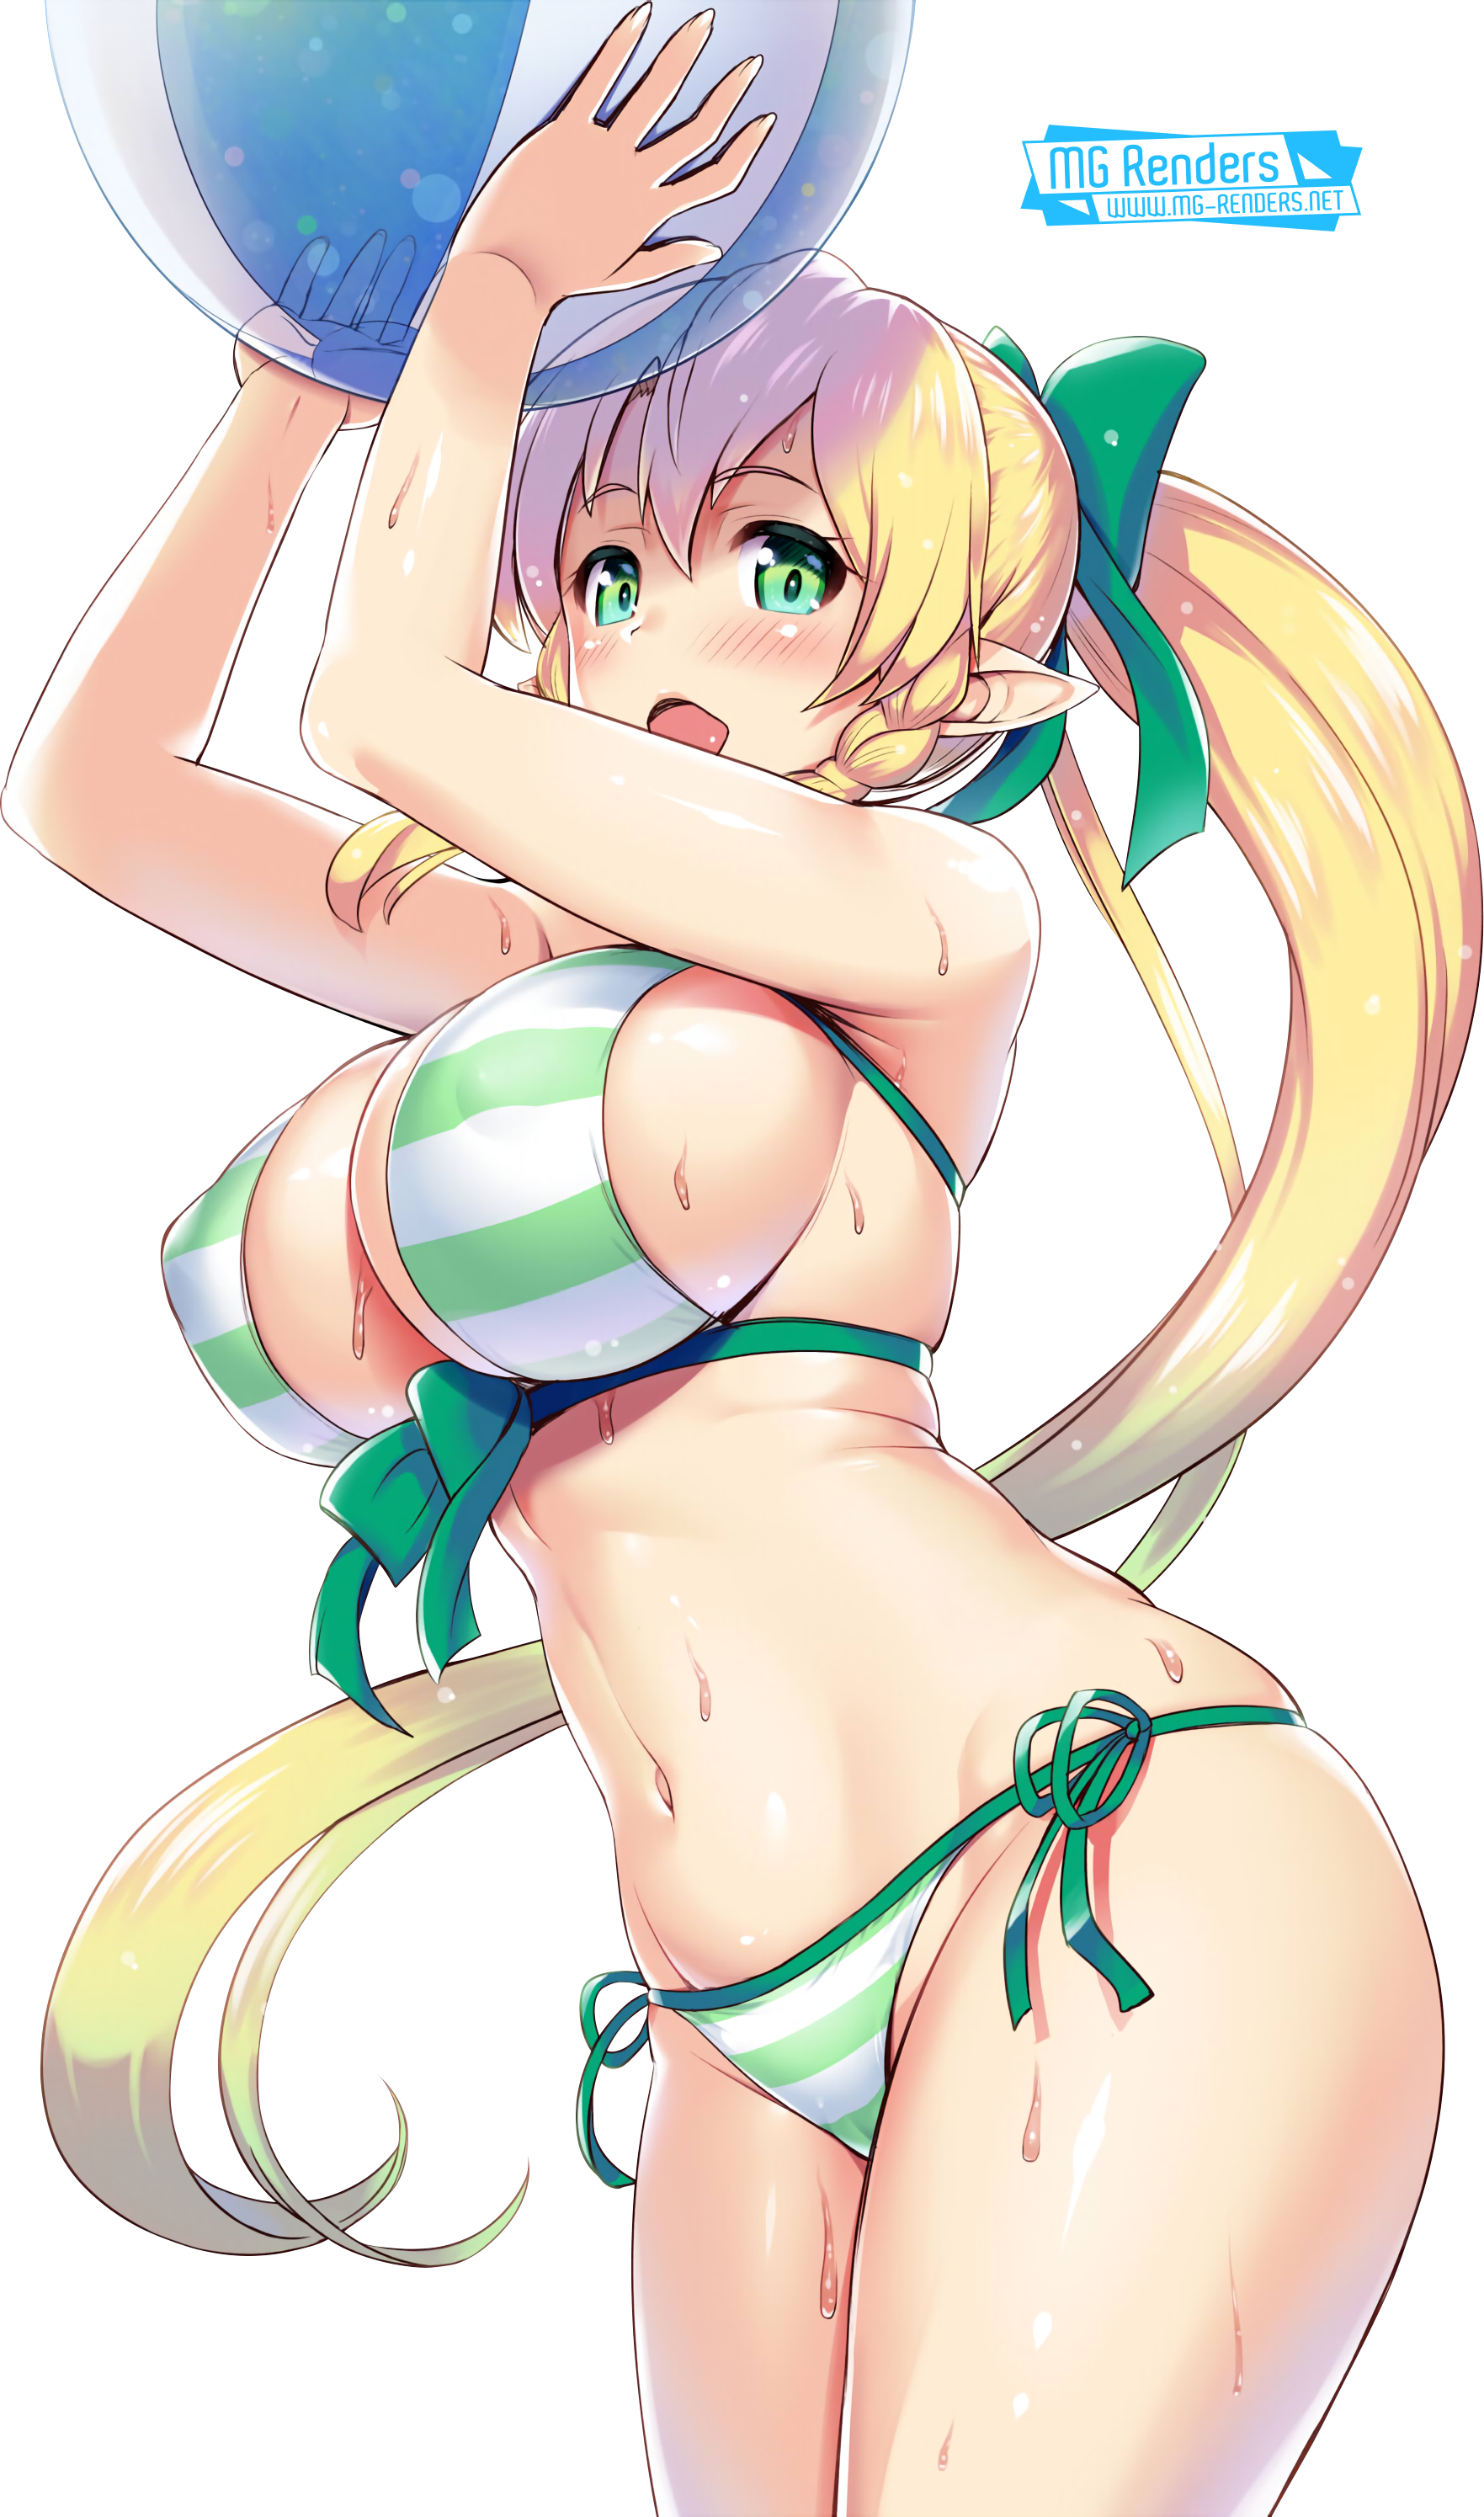 Sword Art Online Leafa Render 15 Anime Png Image Without Background